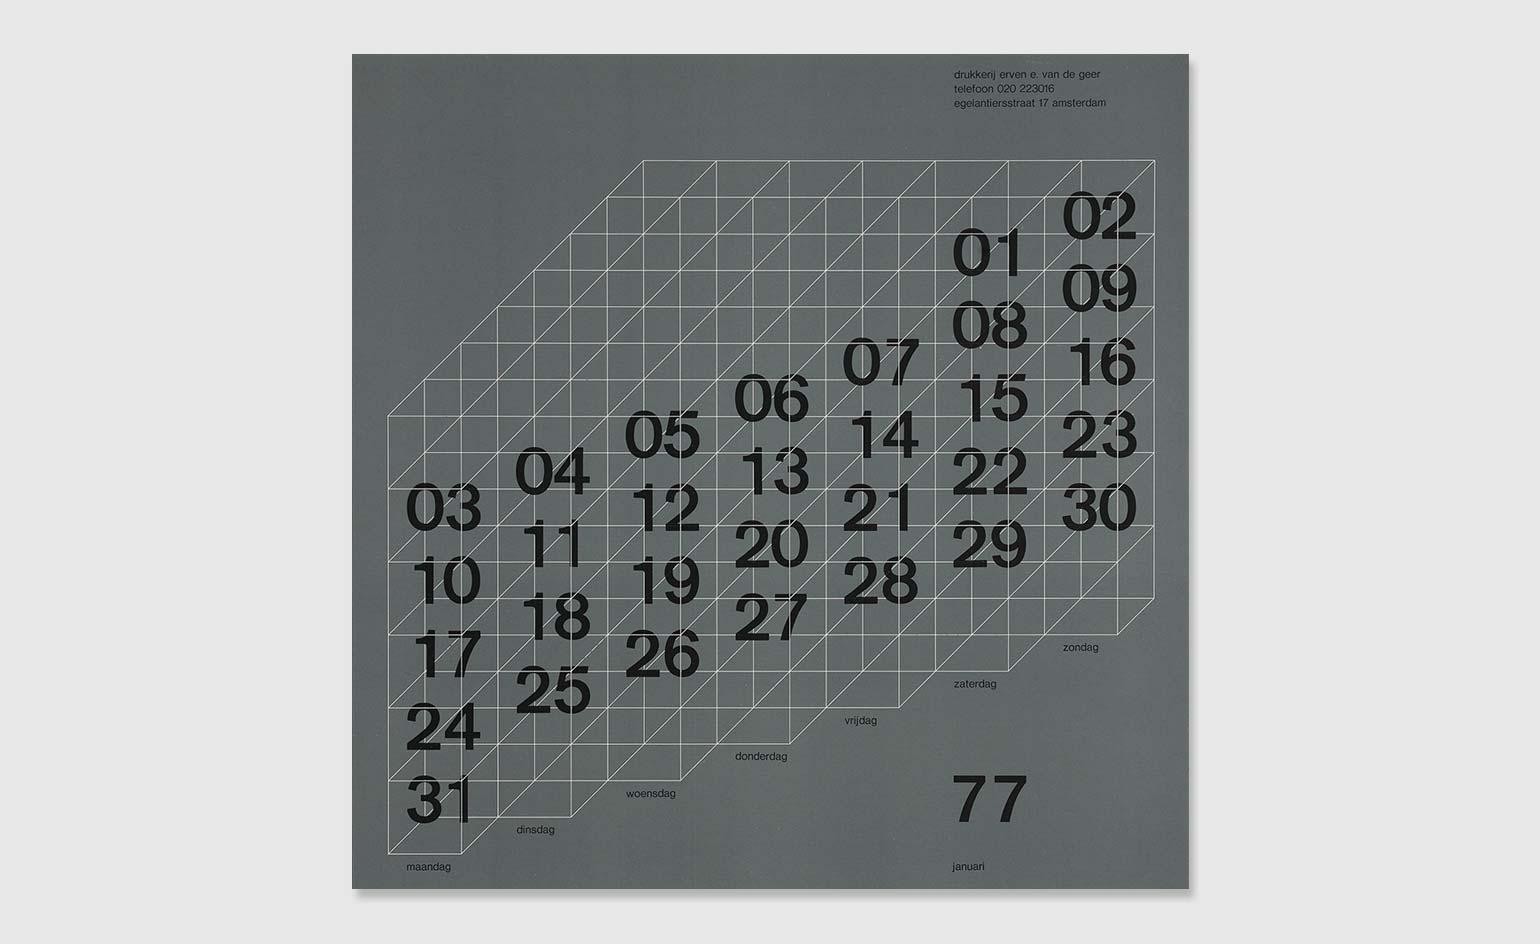 Calendars by Jan van Toorn & Wim Crouwel. Both approach graphic design and typography as different as possible: subjective versus objective.